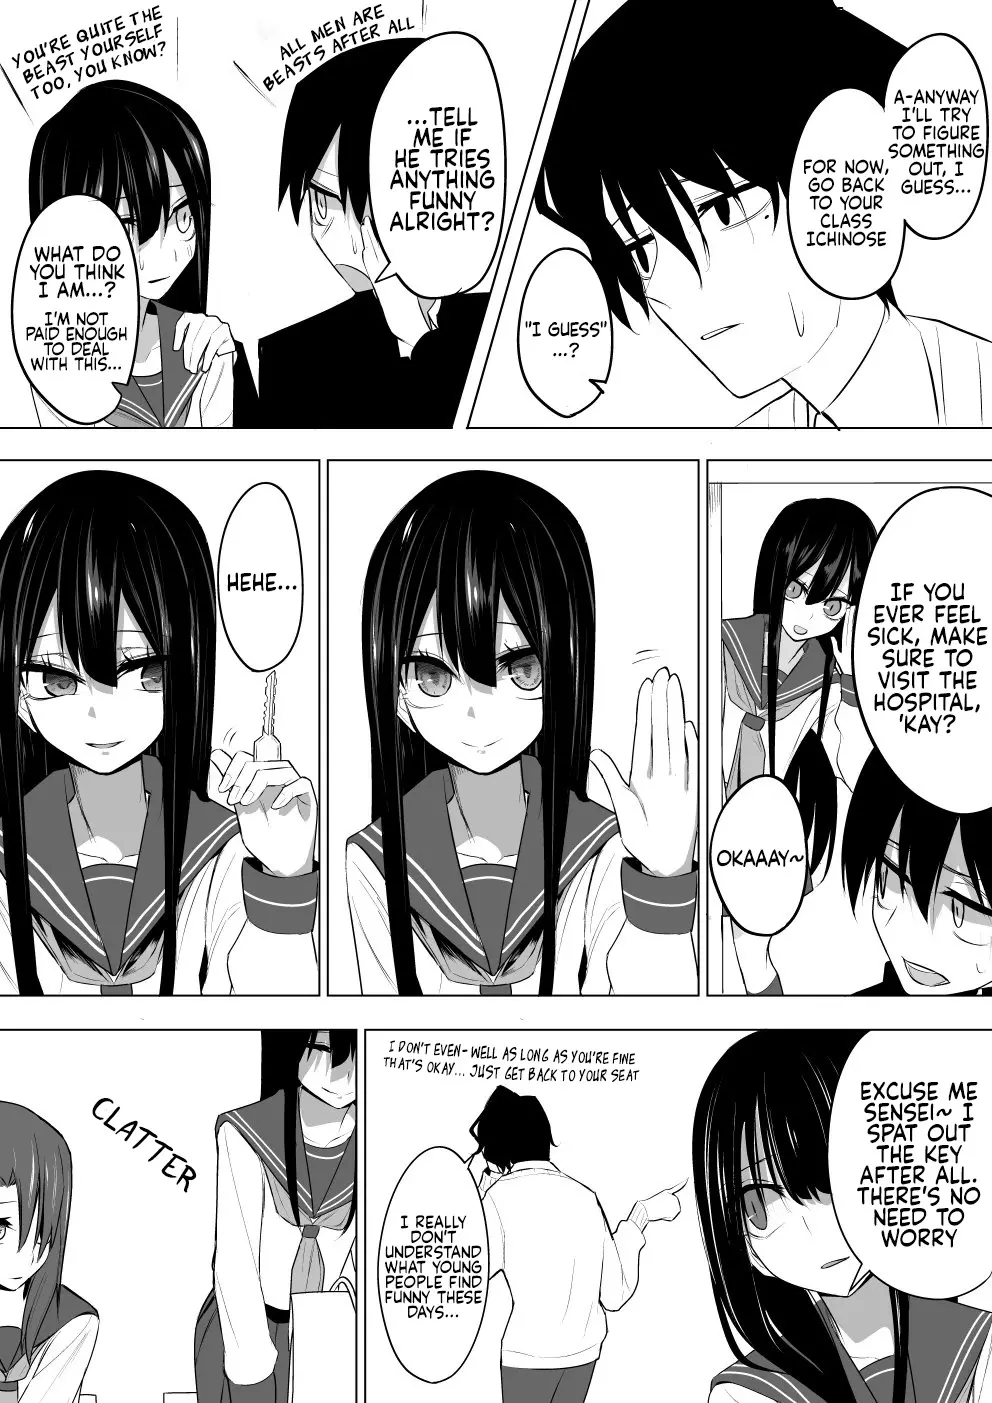 Mitsuishi-San Is Being Weird This Year - 10 page 7-9cf62786